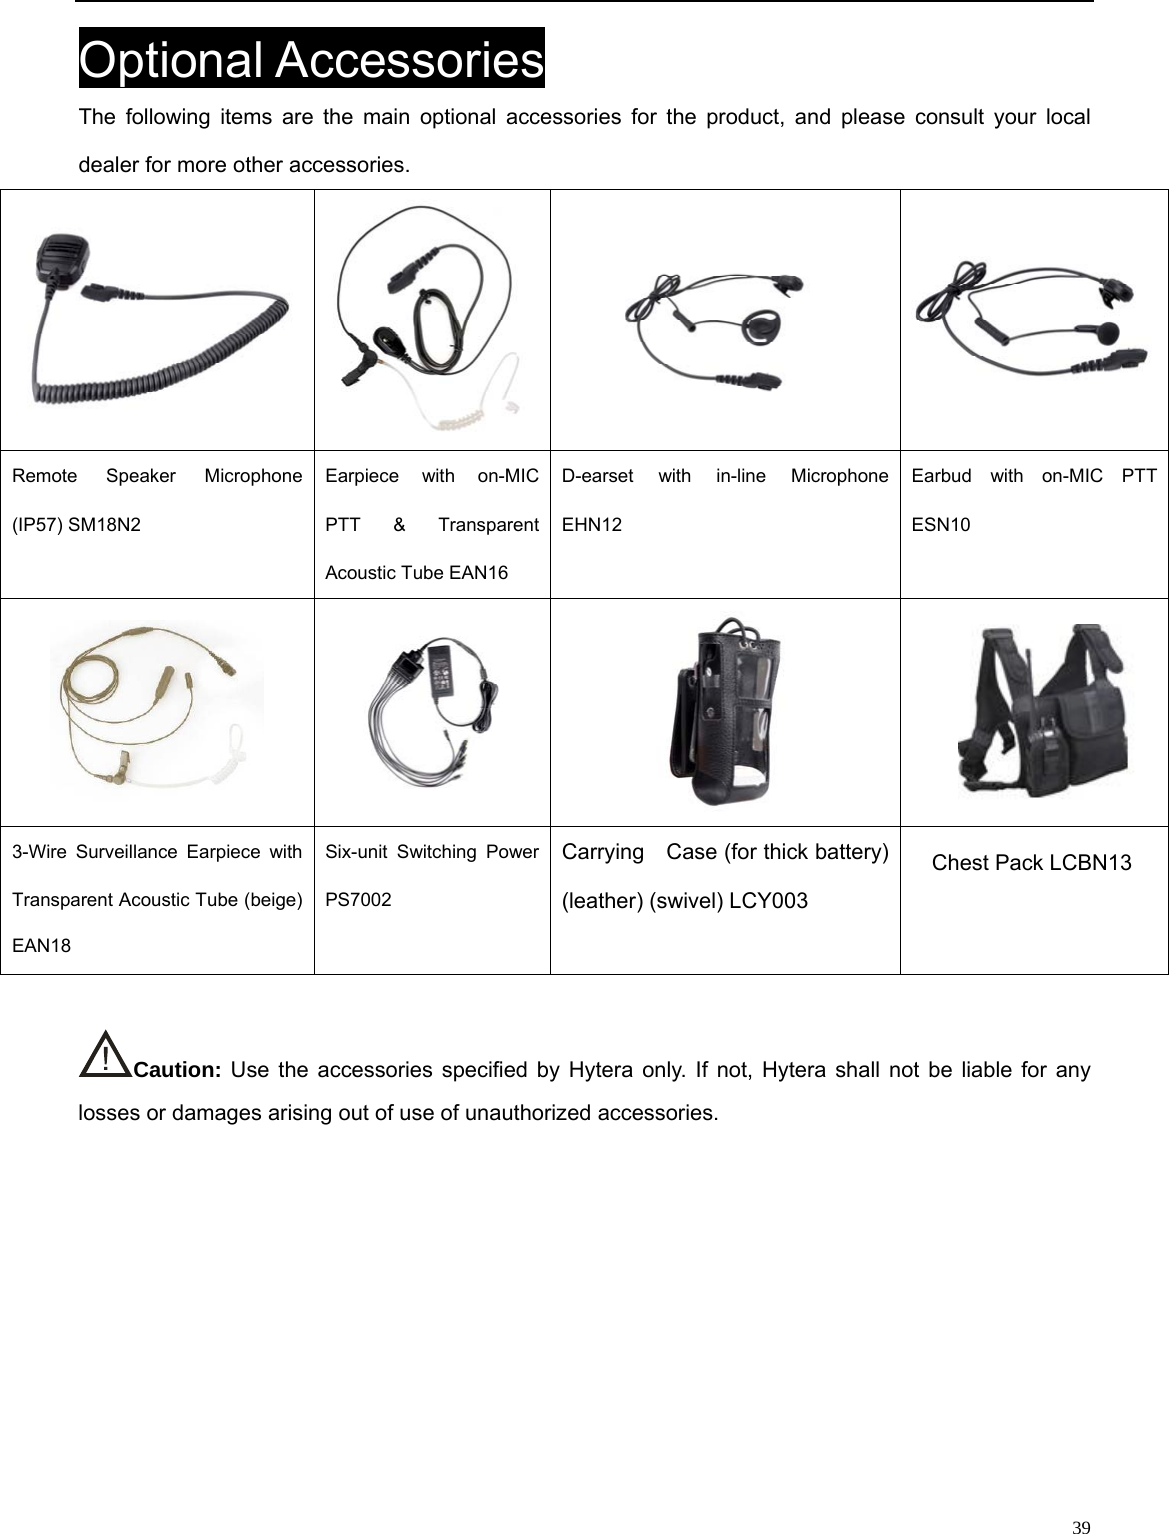                                                                                                            Optional Accessories The following items are the main optional accessories for the product, and please consult your local dealer for more other accessories.  Remote Speaker Microphone (IP57) SM18N2   Earpiece with on-MIC PTT &amp; Transparent Acoustic Tube EAN16   D-earset with in-line Microphone EHN12 Earbud with on-MIC PTT ESN10        Carrying    Case (for thick battery) (leather) (swivel) LCY003 3-Wire Surveillance Earpiece with Transparent Acoustic Tube (beige) EAN18Six-unit Switching Power PS7002    Caution: Use the accessories specified by Hytera only. If not, Hytera shall not be liable for any losses or damages arising out of use of unauthorized accessories.               39 Chest Pack LCBN13 